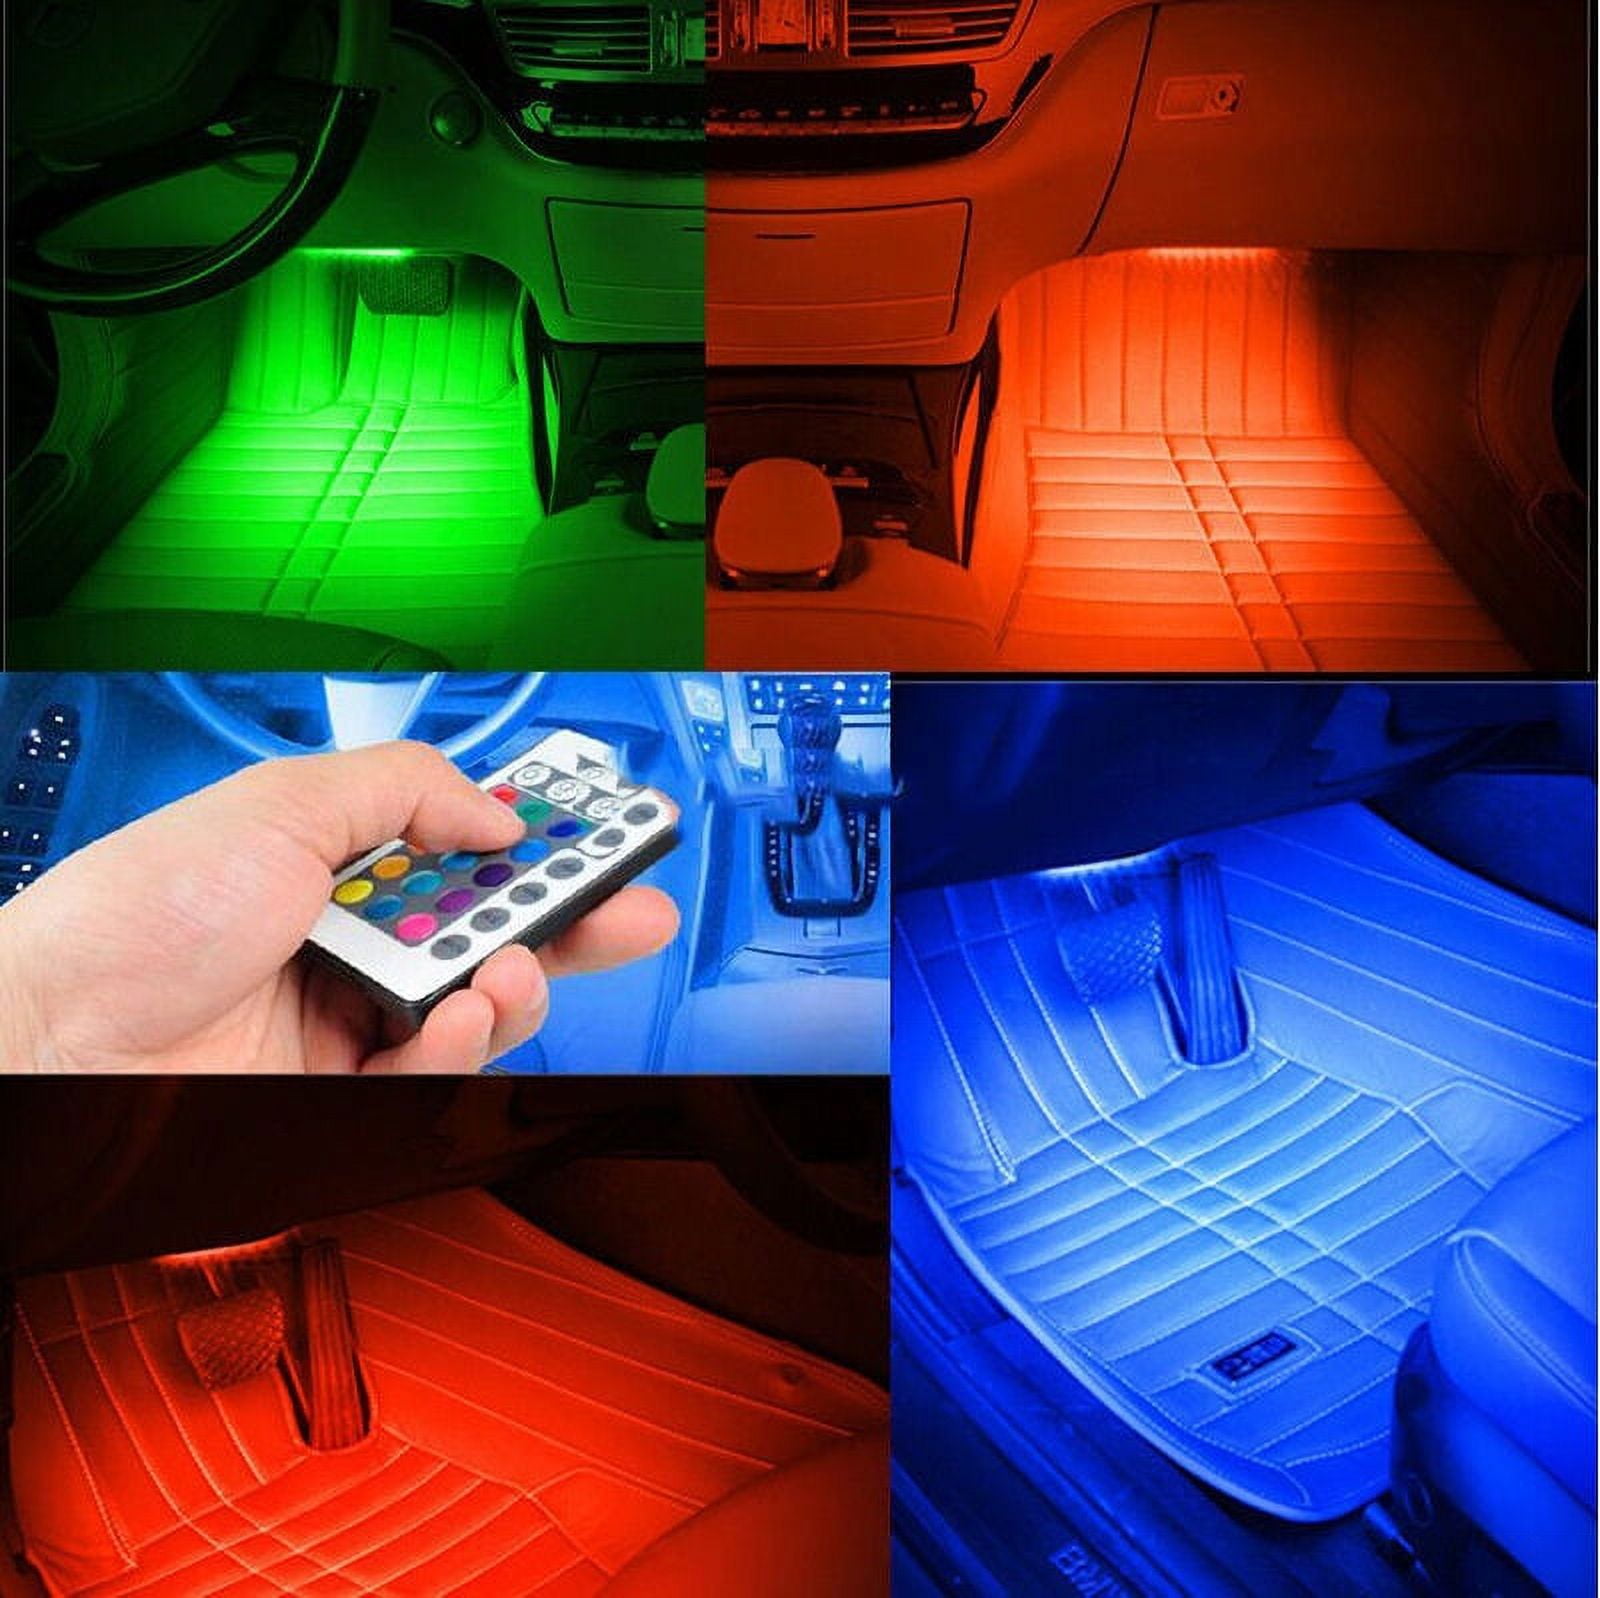 RGB Car Interior Lights - 4pcs 48 LEDs Car LED Strip Atmosphere Light with  Remote and Control Box, Music Sync Waterproof